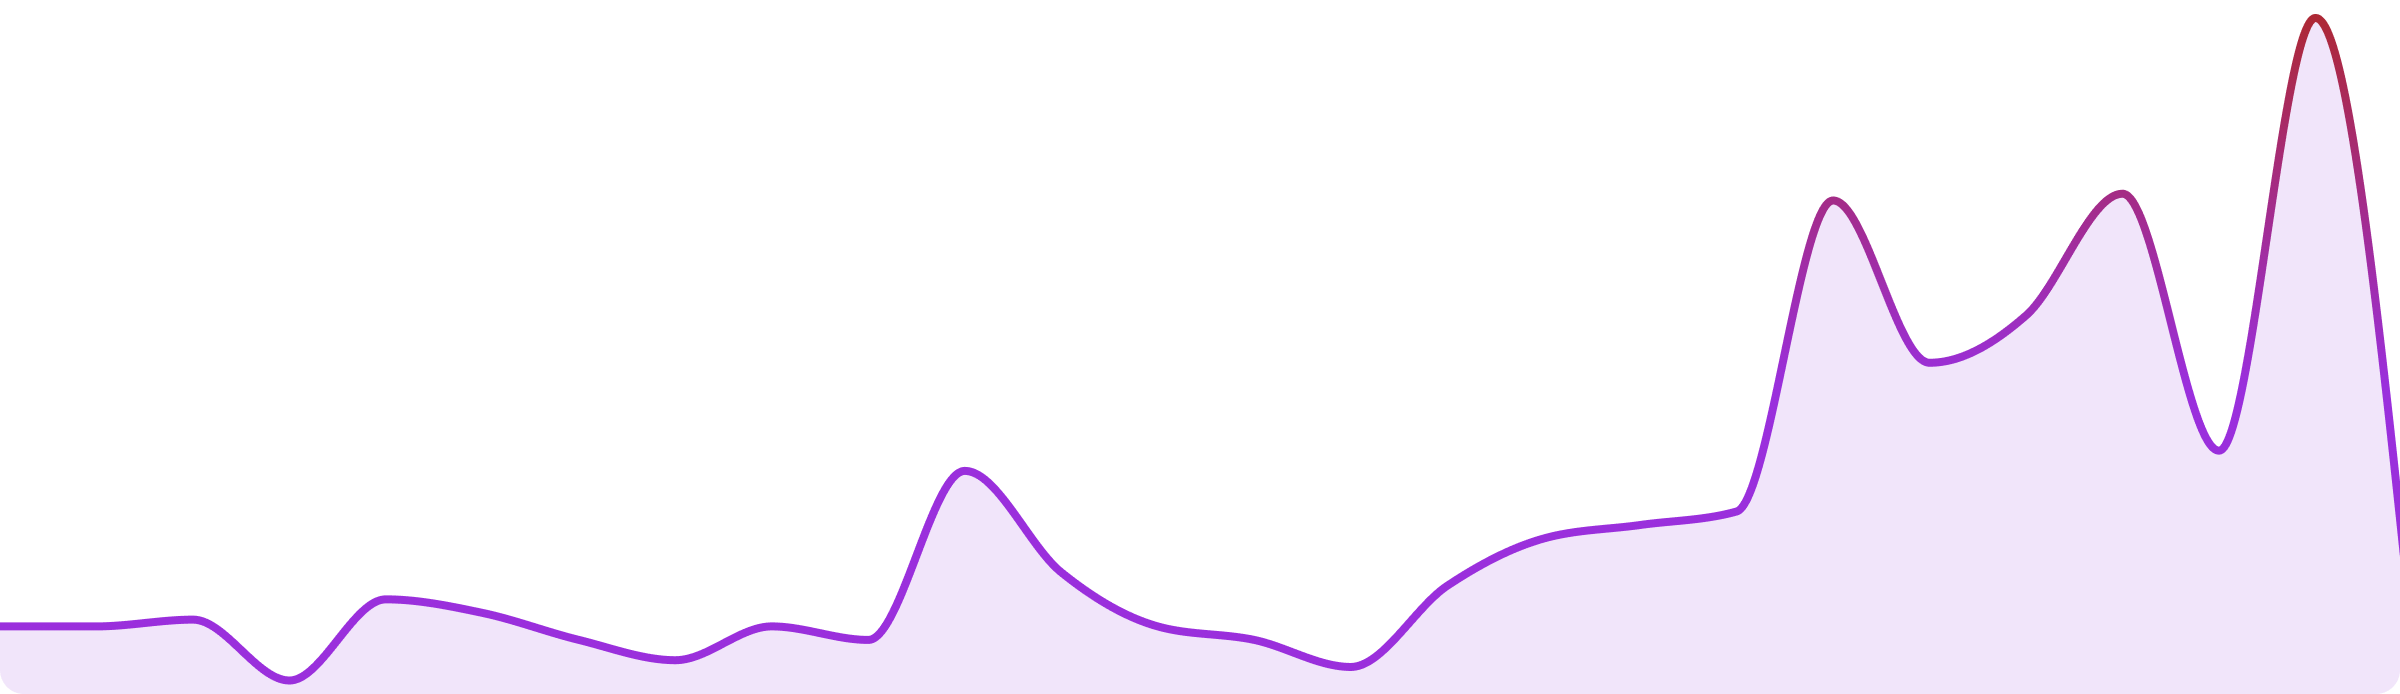 Graph background